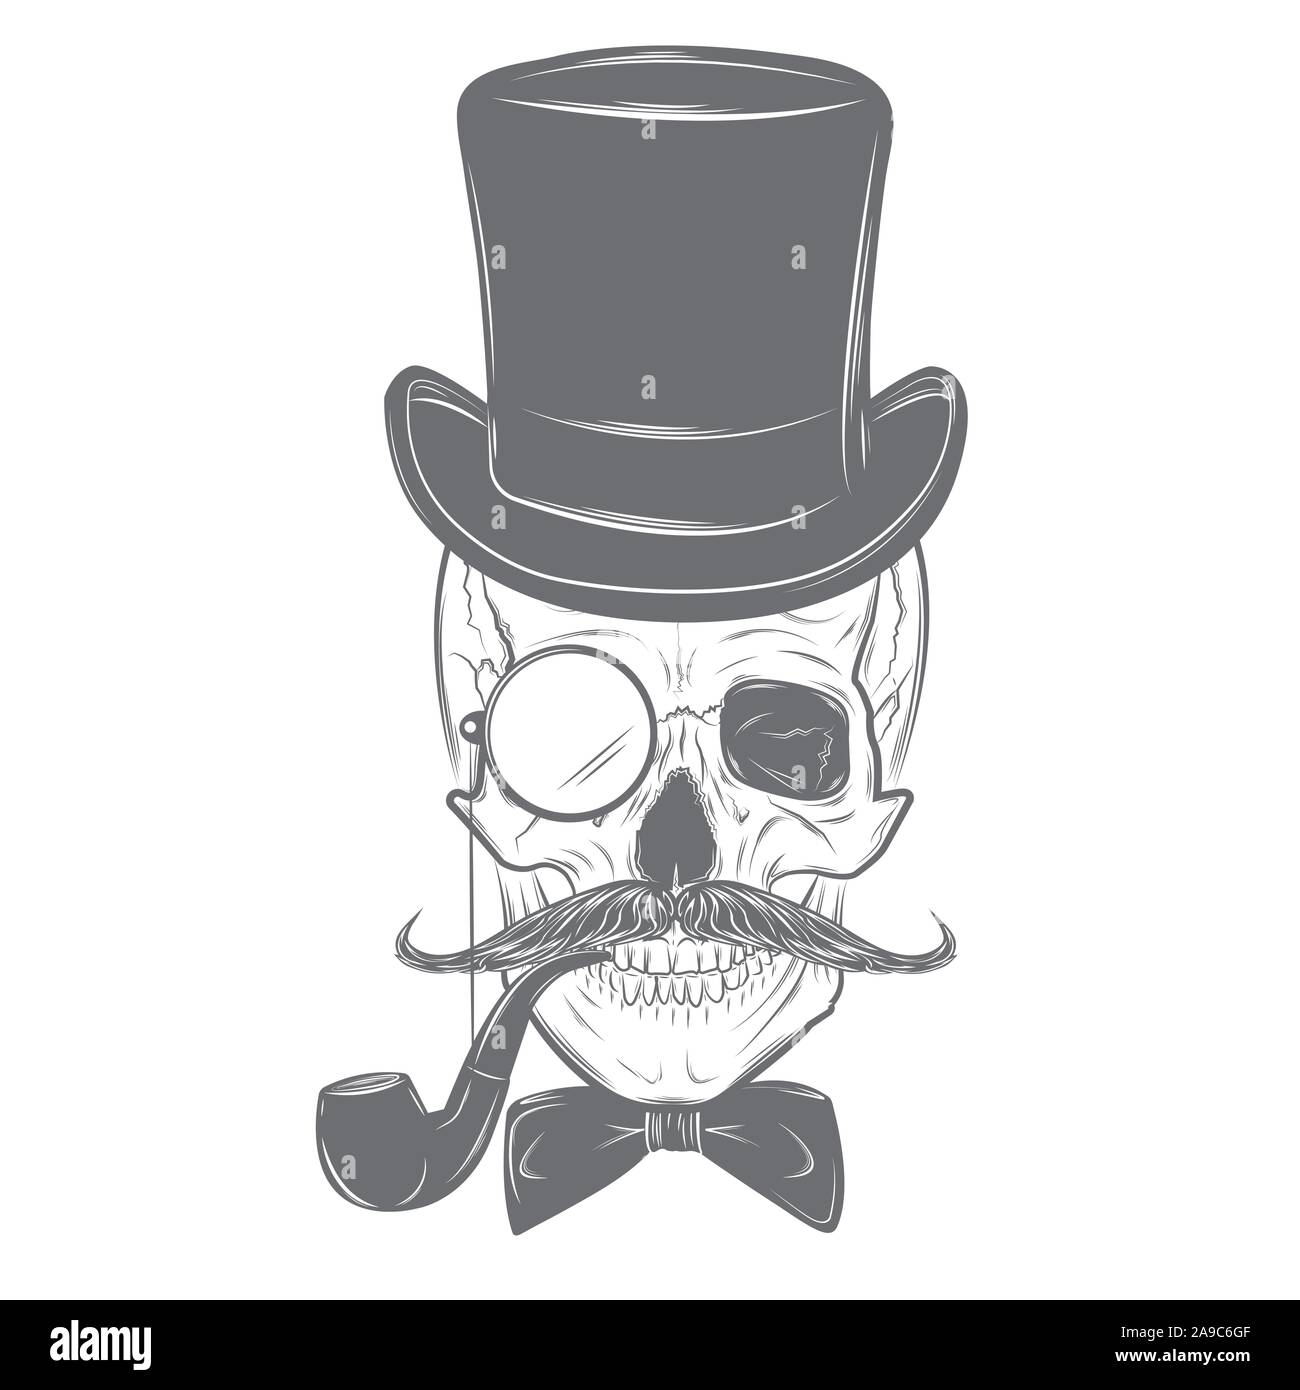 Gentleman Hipster skull in monocle with mustache, bow tie, top hat and smoking pipe. Skull print, skull illustration isolated on white background. Stock Vector